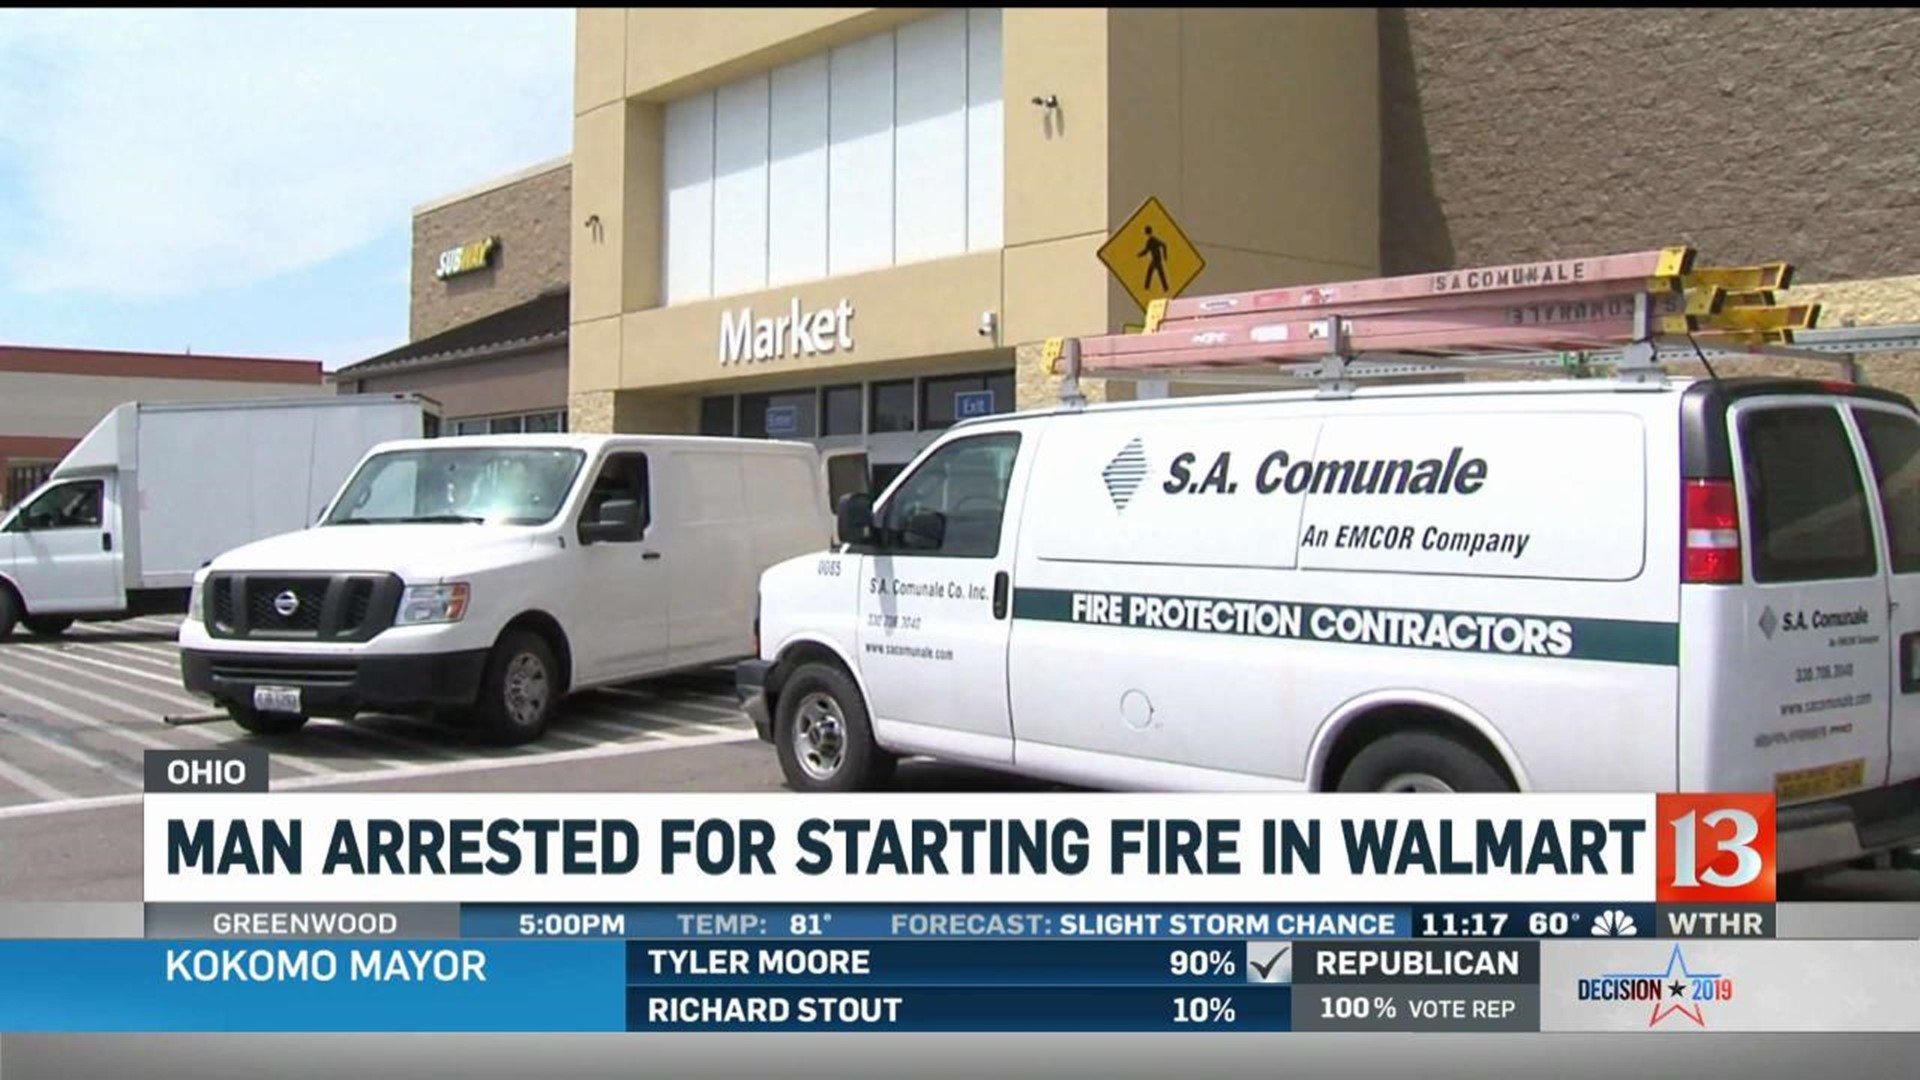 Ohio Man Arrested for Starting Fire in Walmart